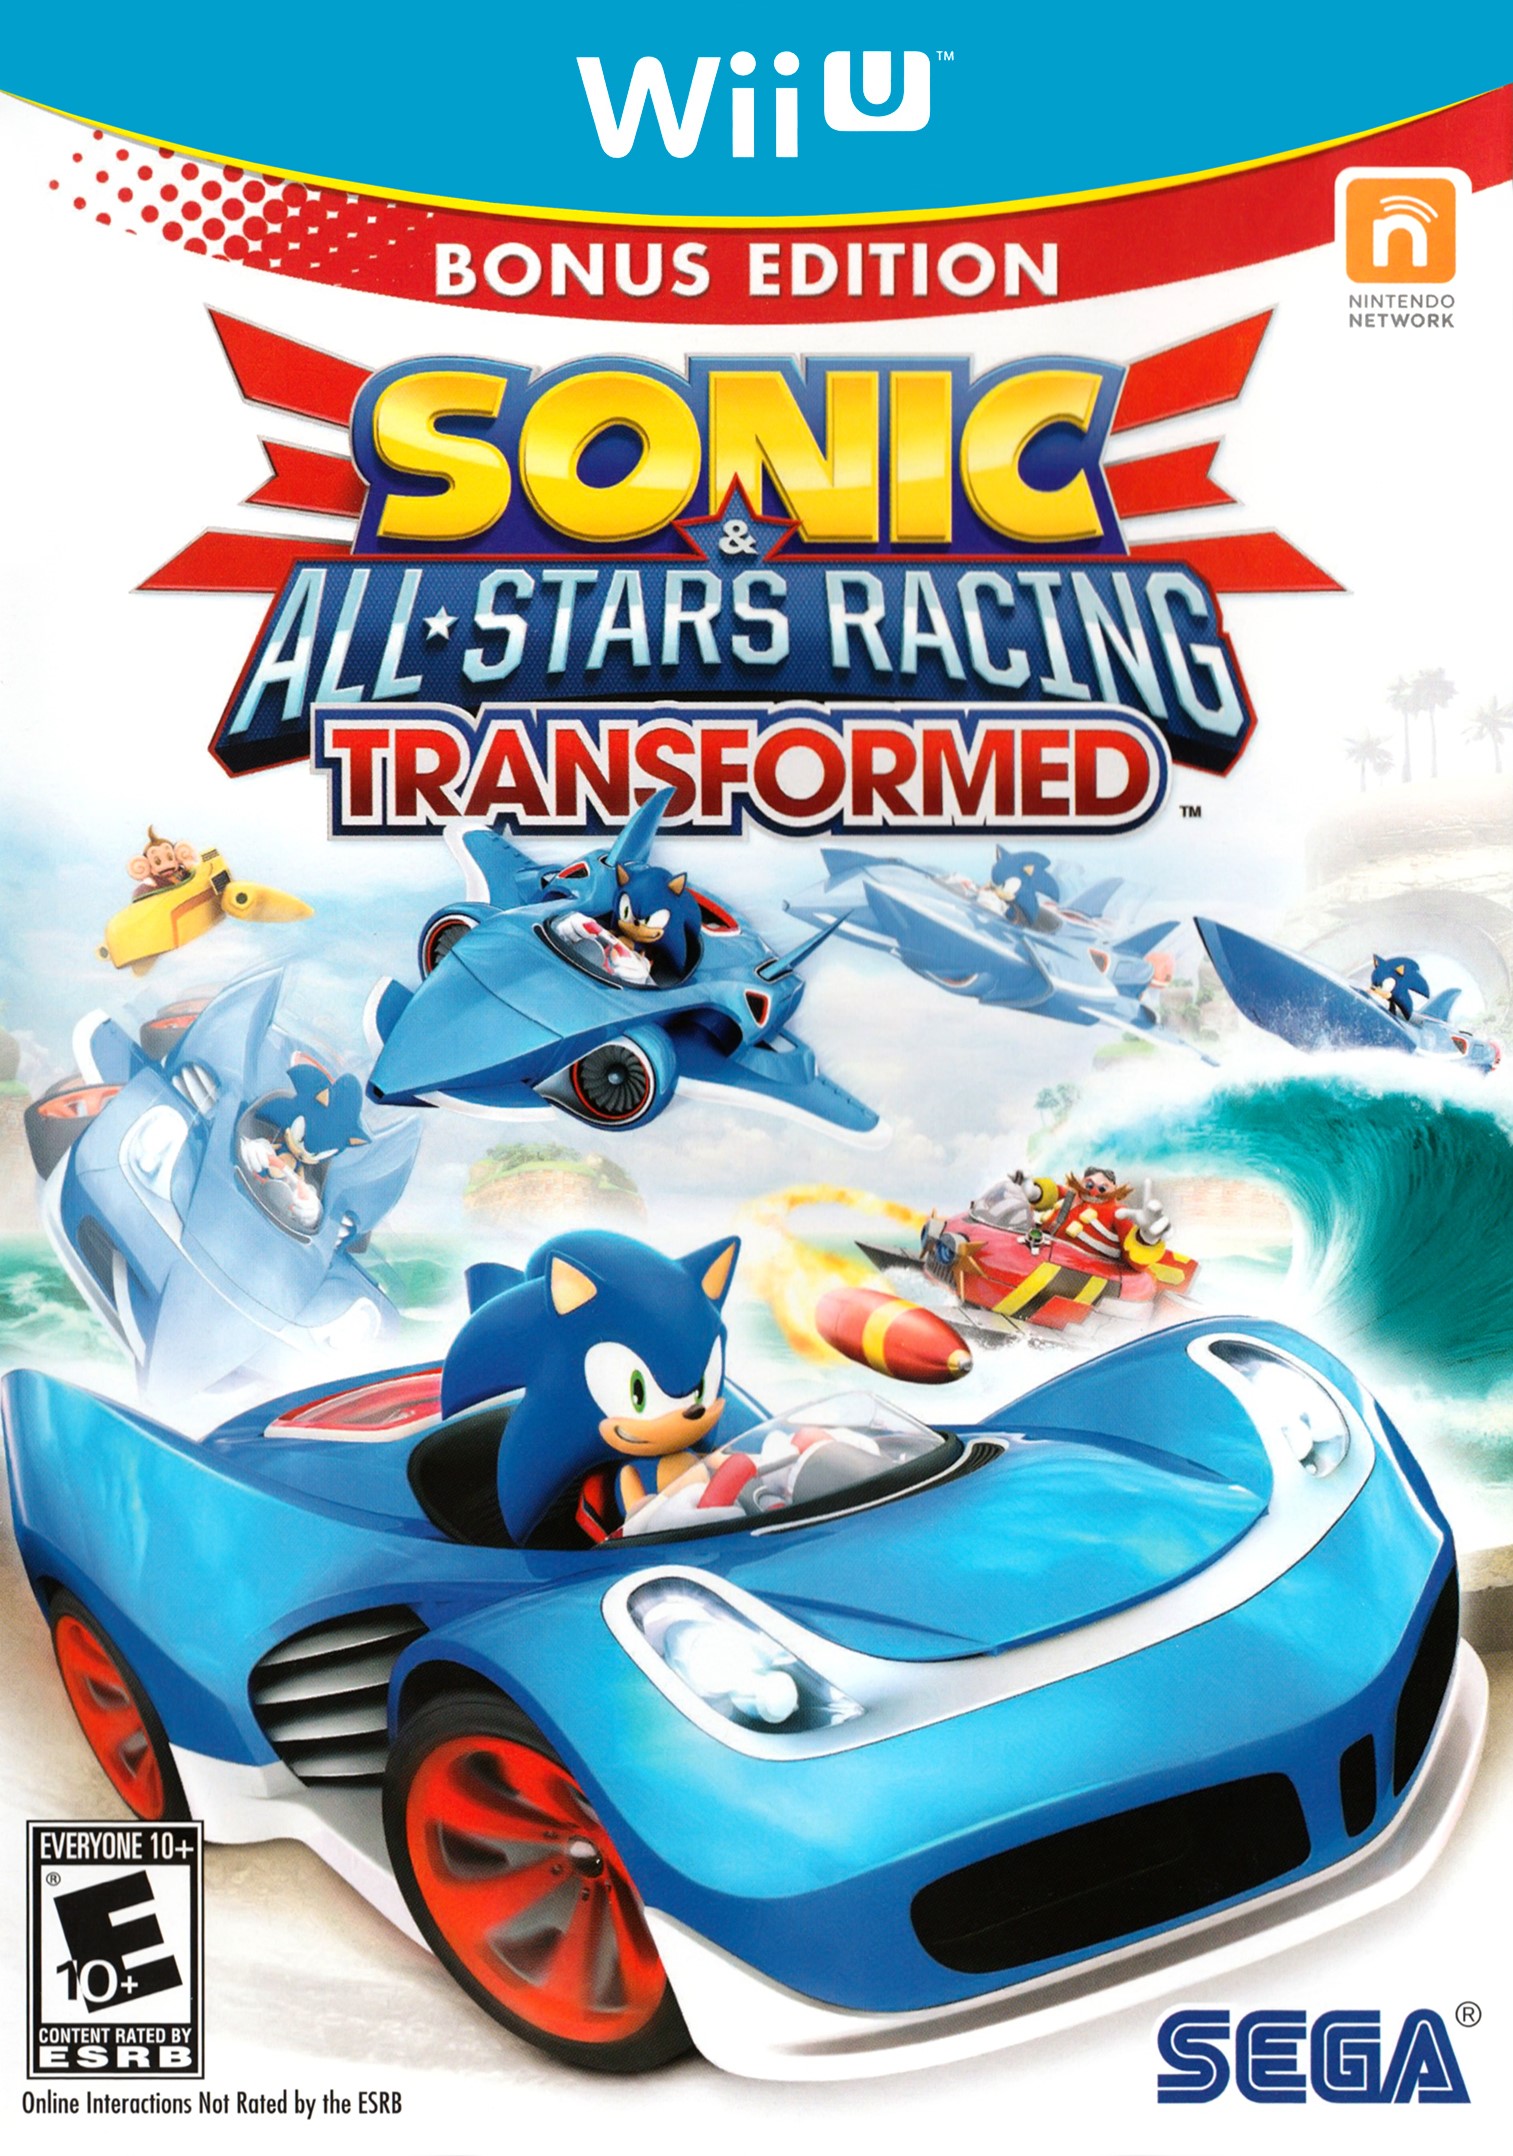 'Sonic and-All-Stars Racing Transformed'